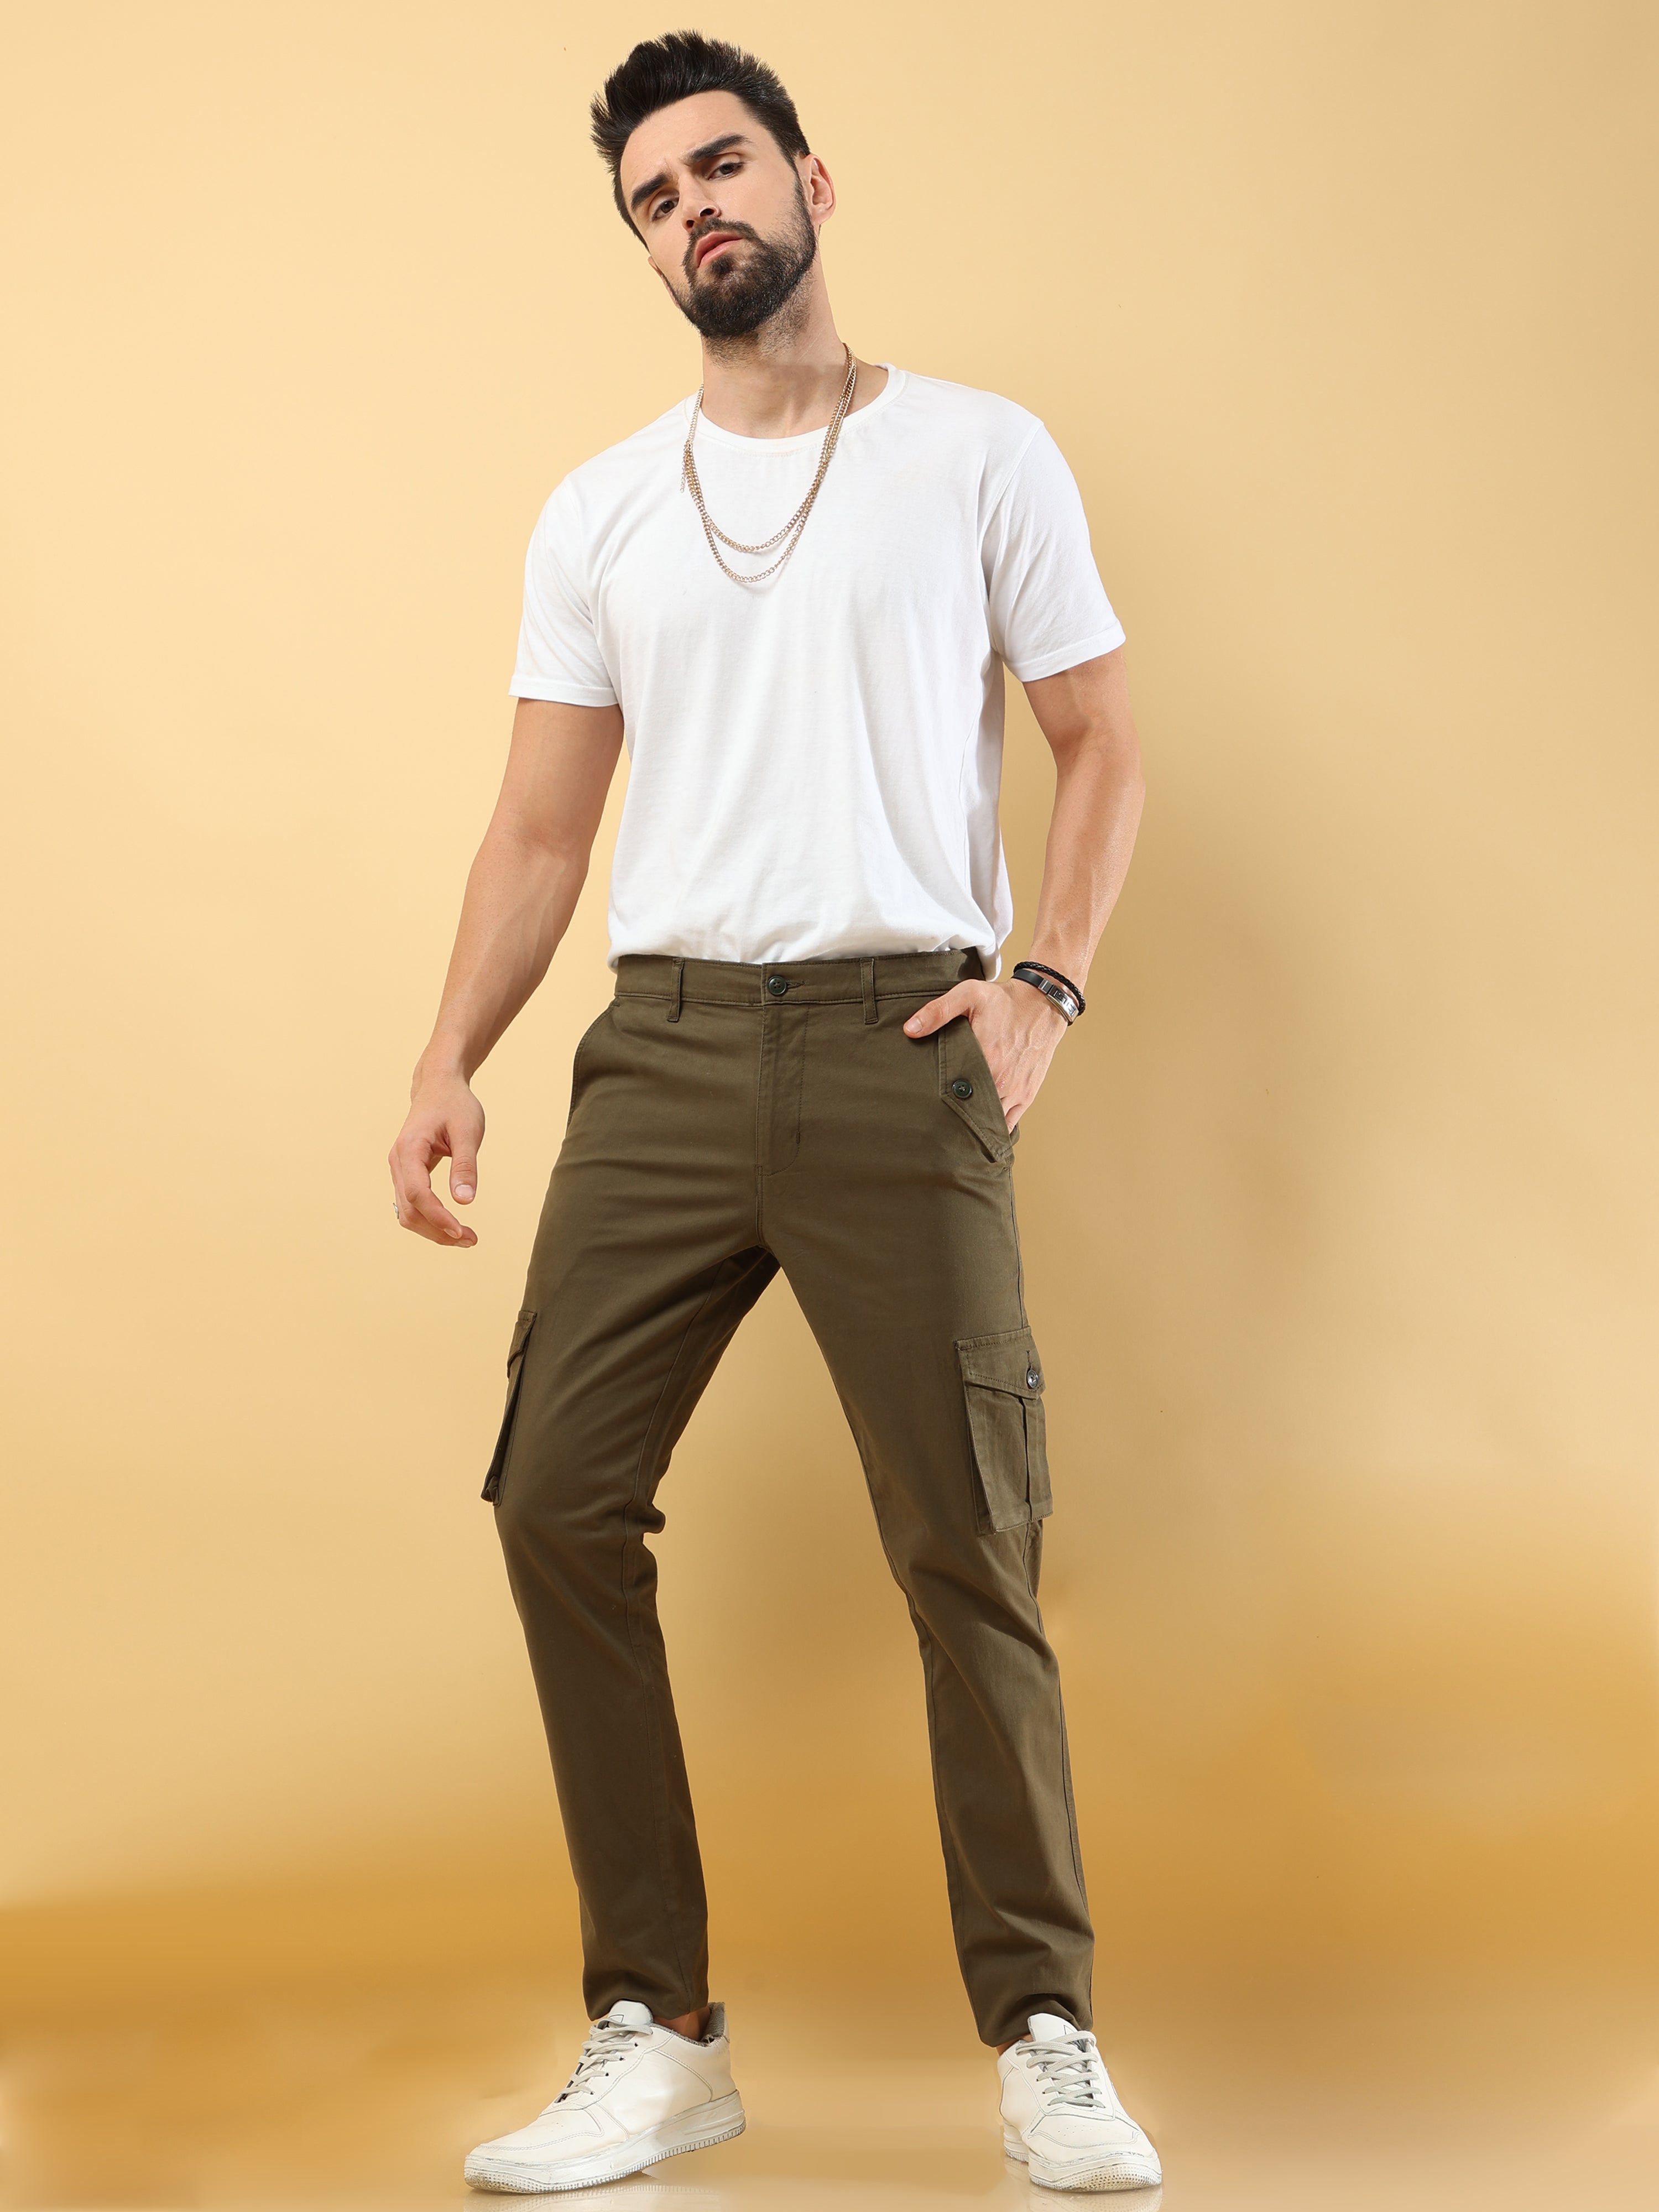 Olive Green Cargo Pants Mens 